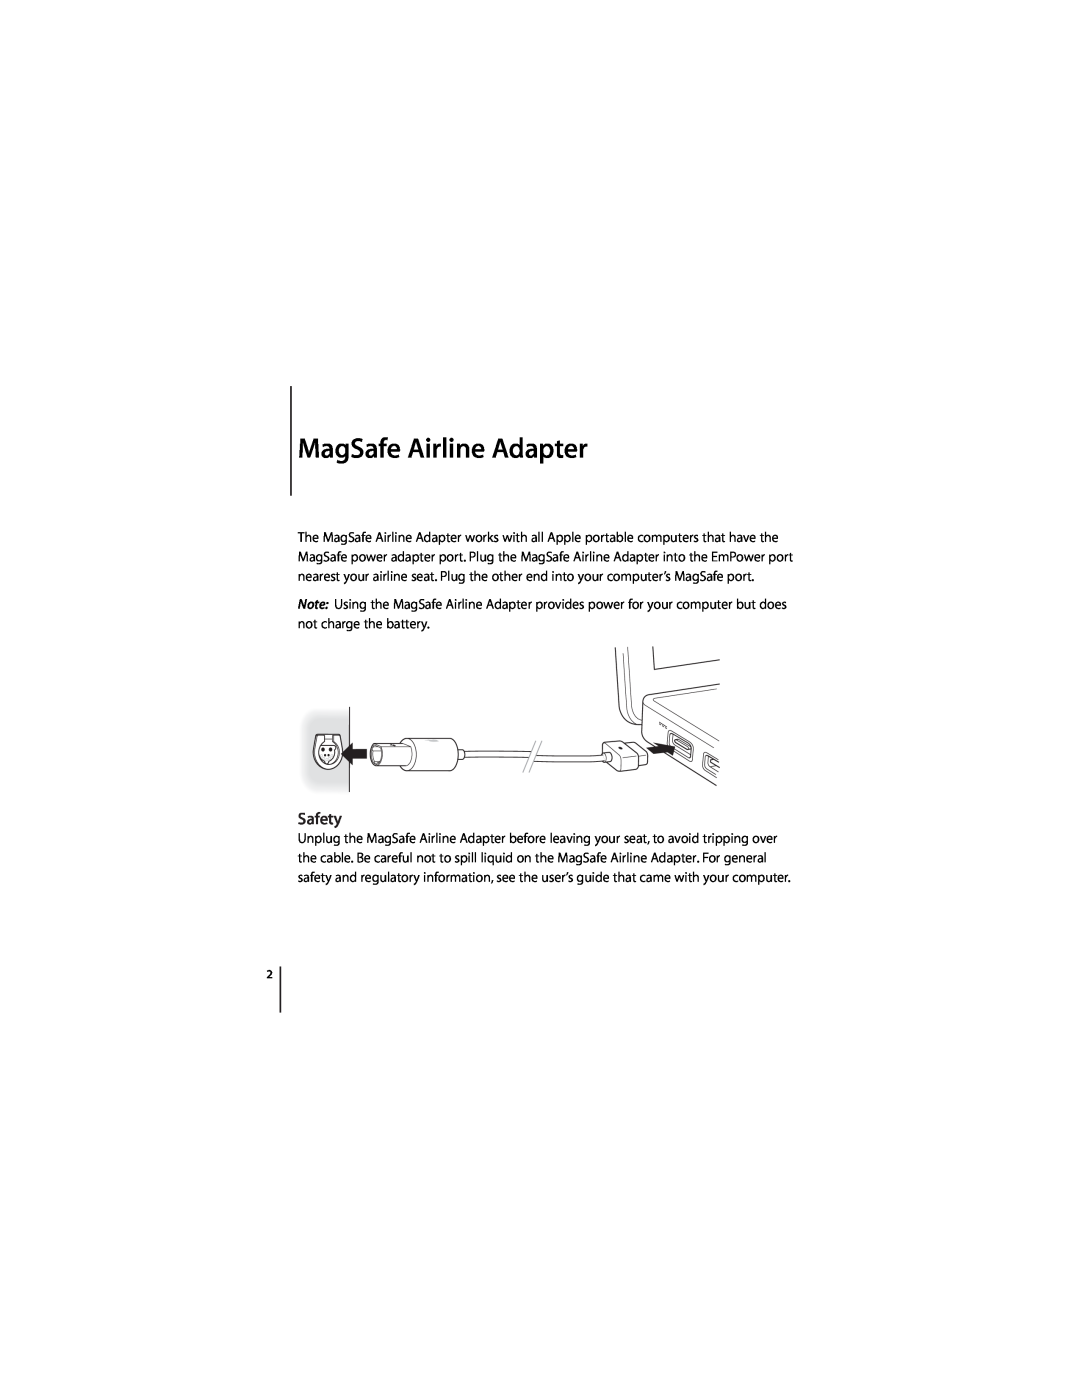 Apple manual MagSafe Airline Adapter, Safety 